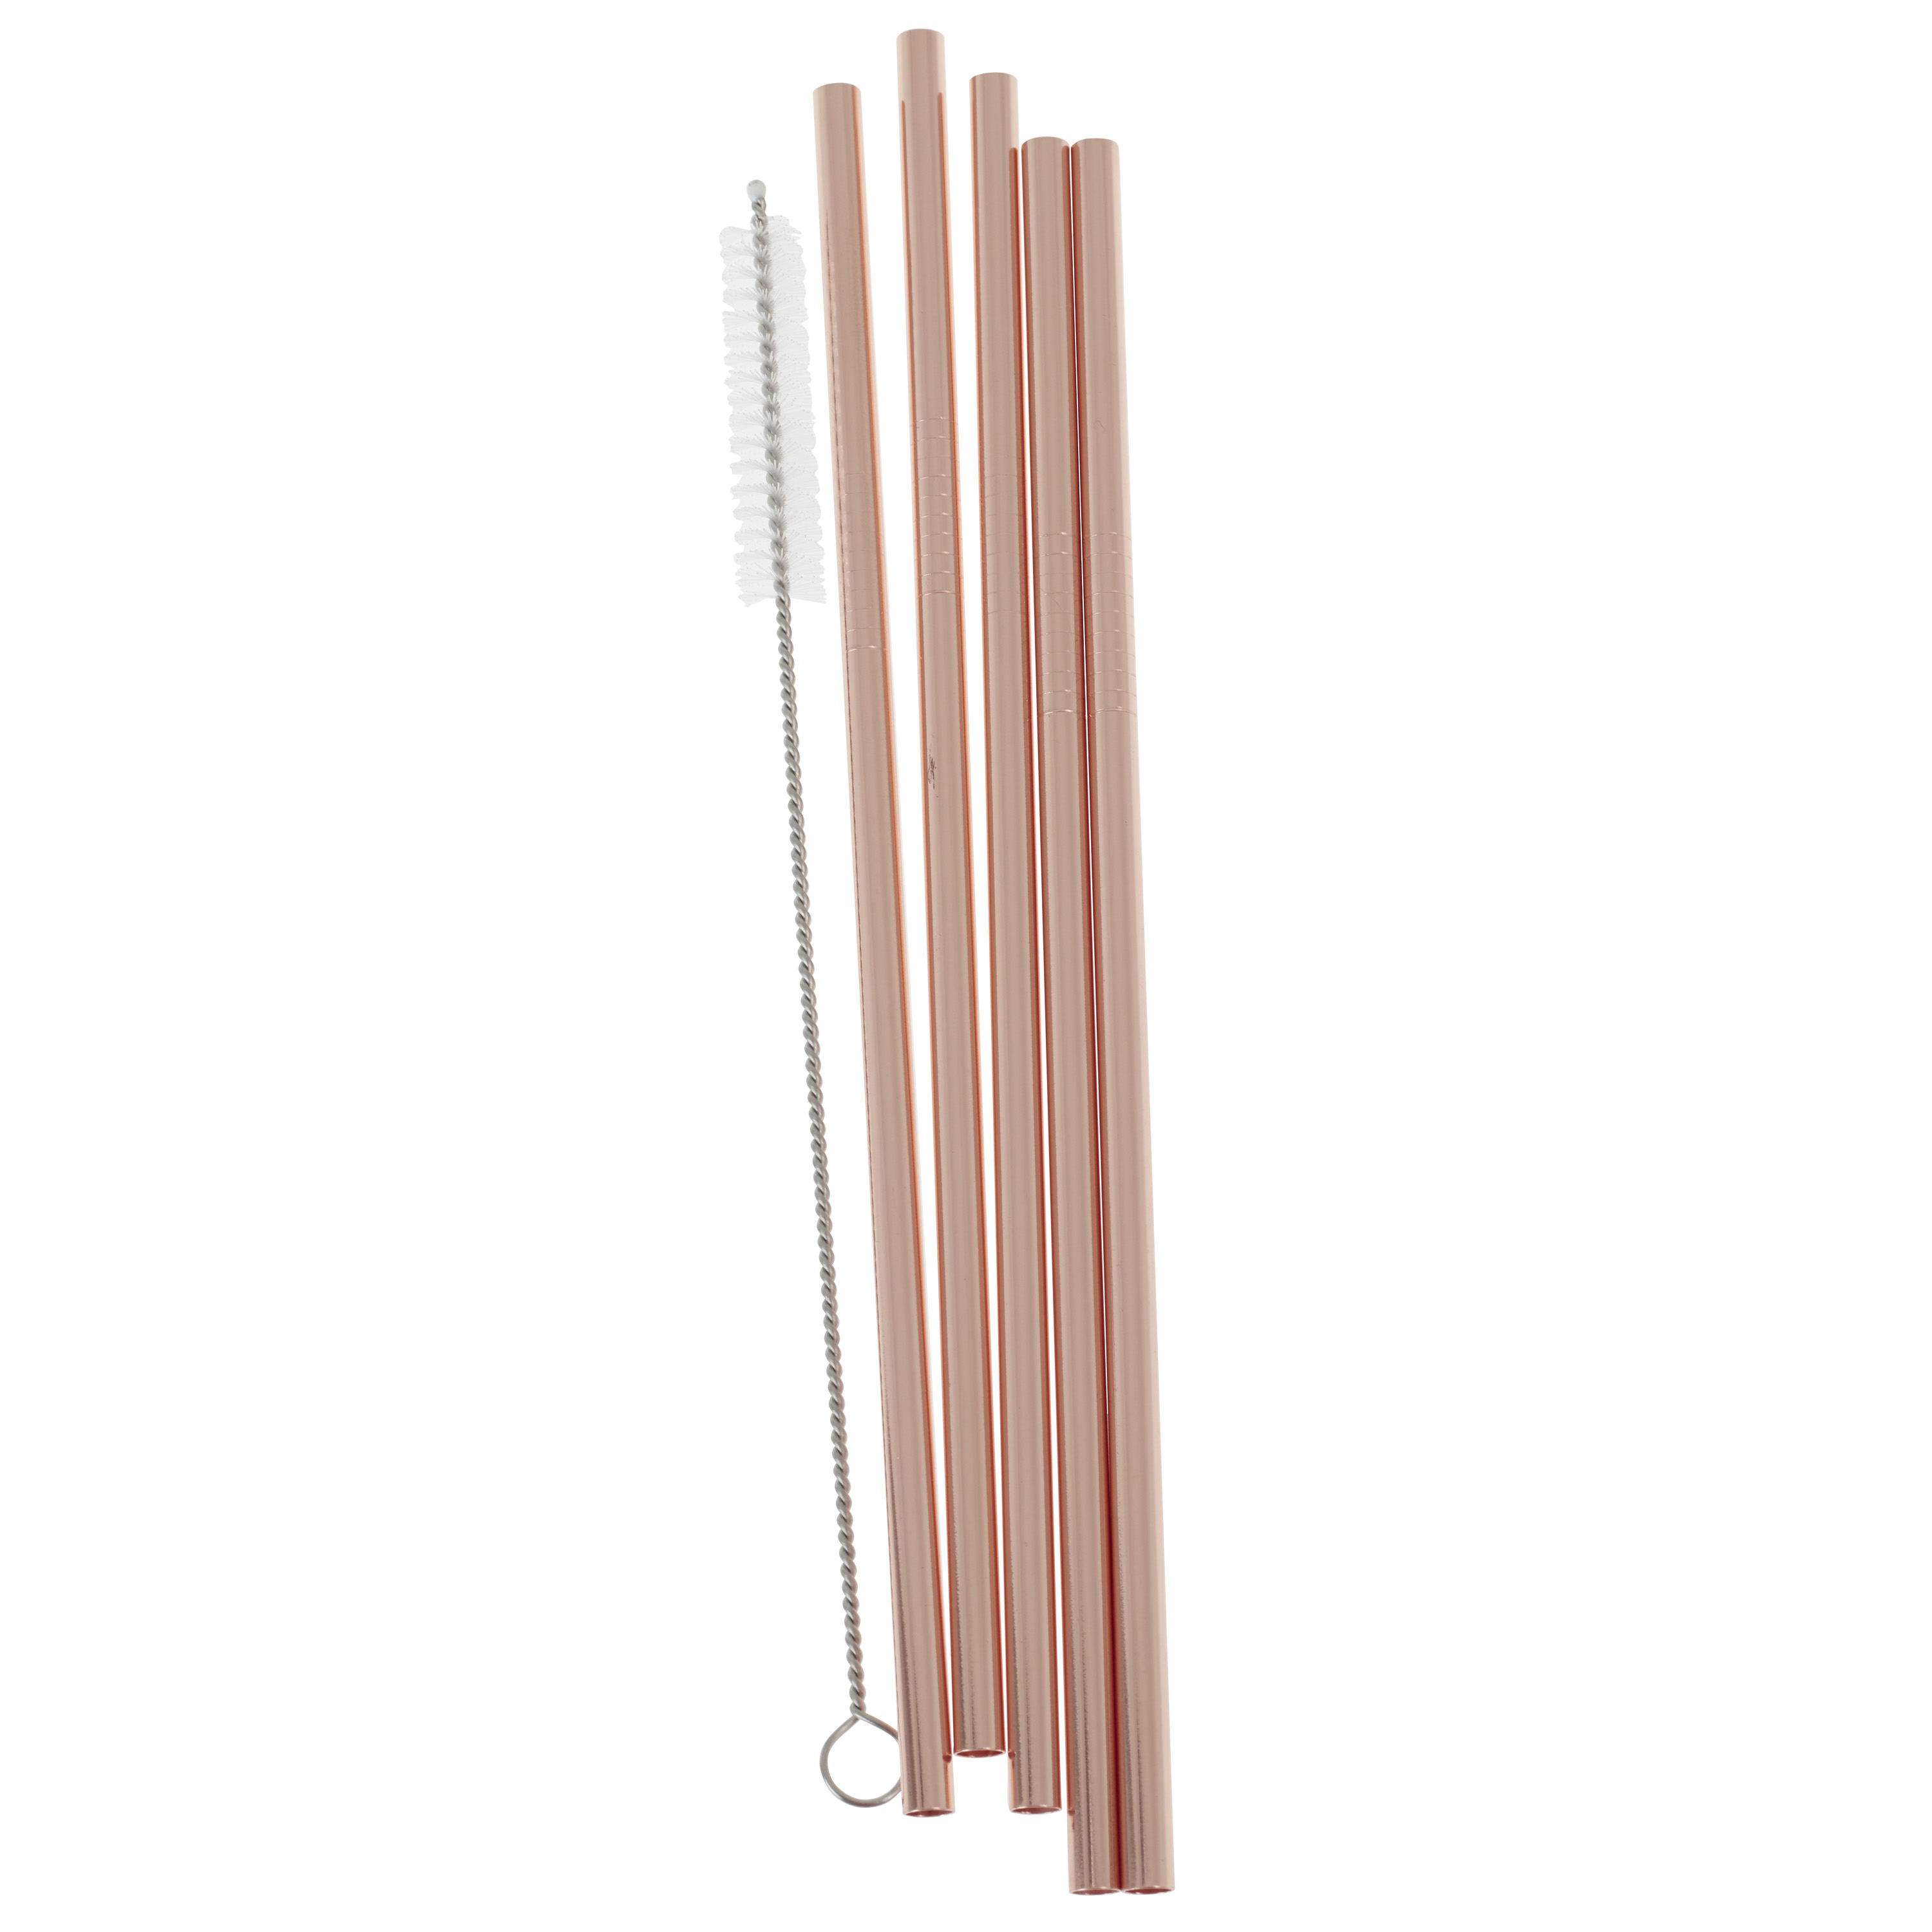 5 rose gold stainless steel straws